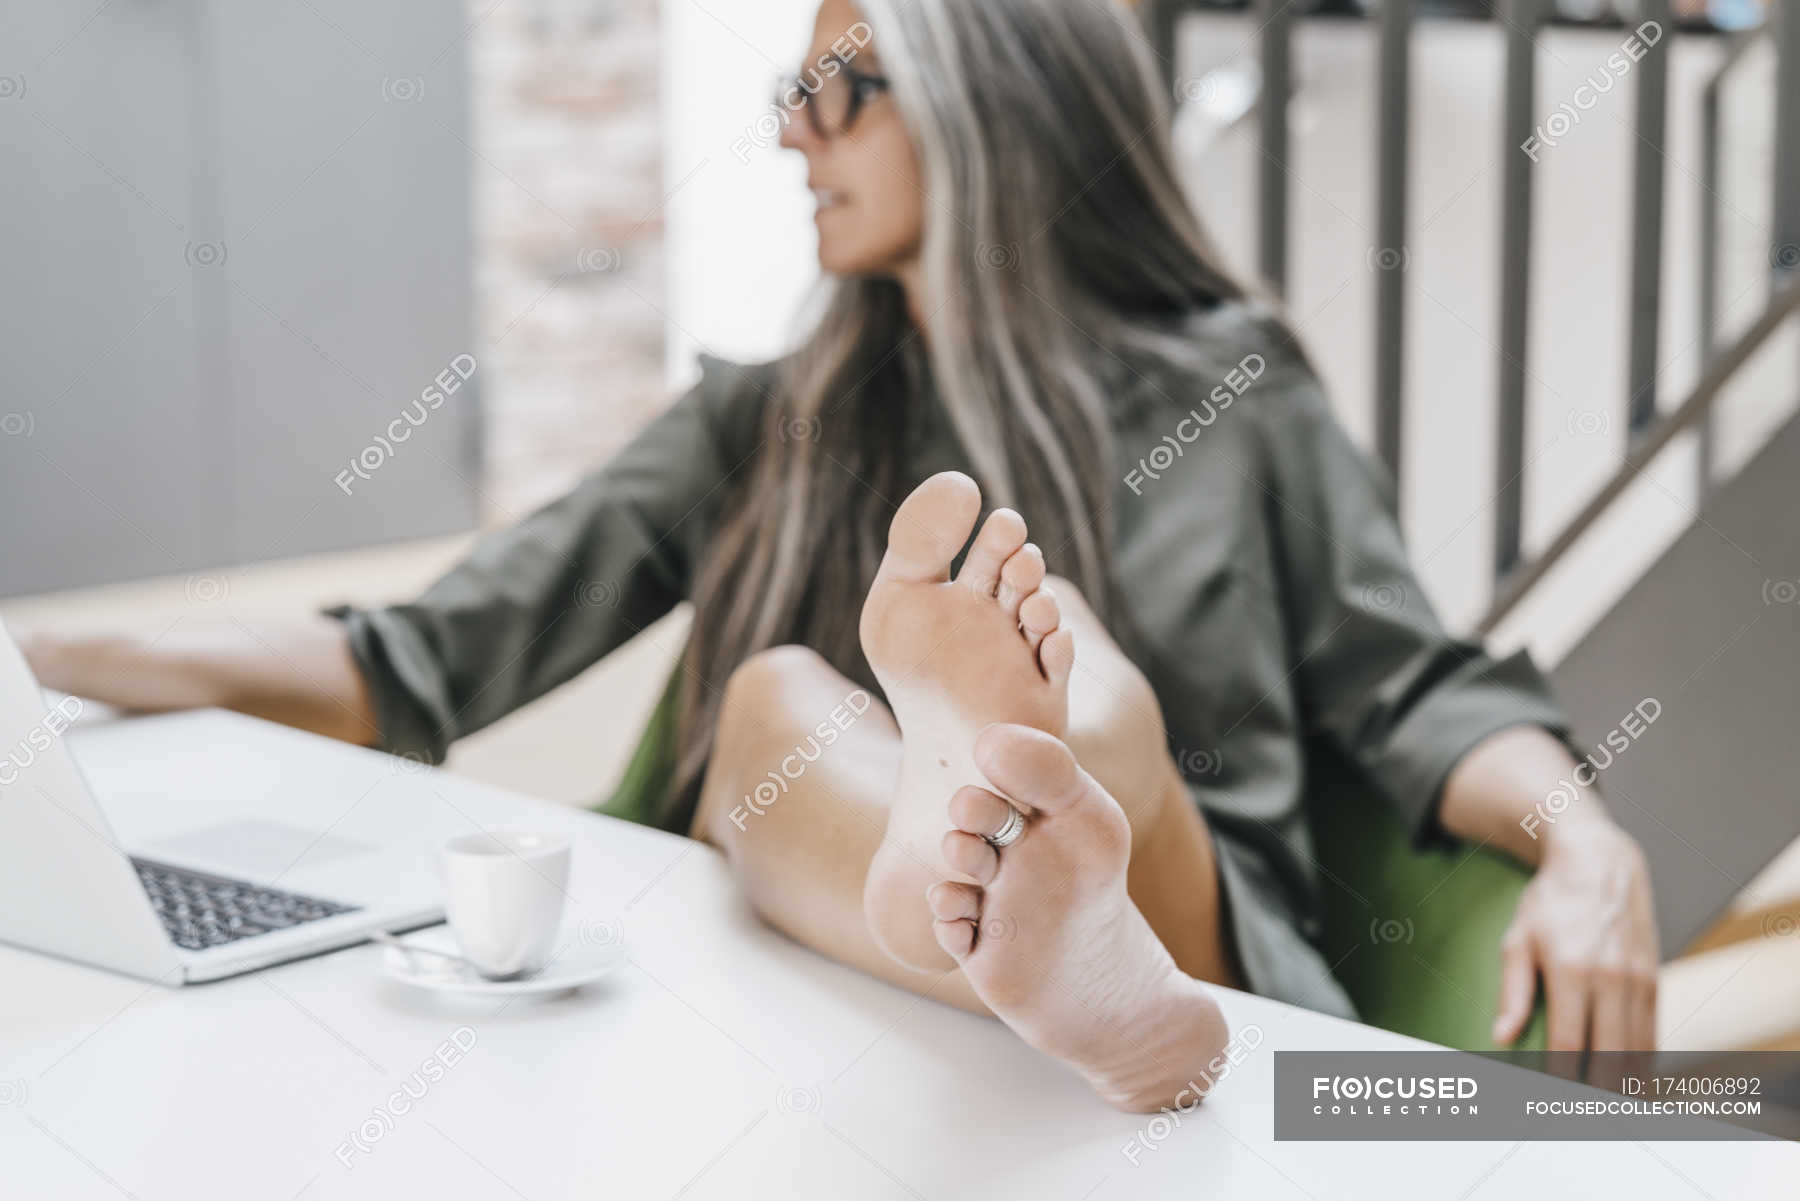 Woman working in office with bare feet on desk — cup, businesswoman - Stock  Photo | #174006892